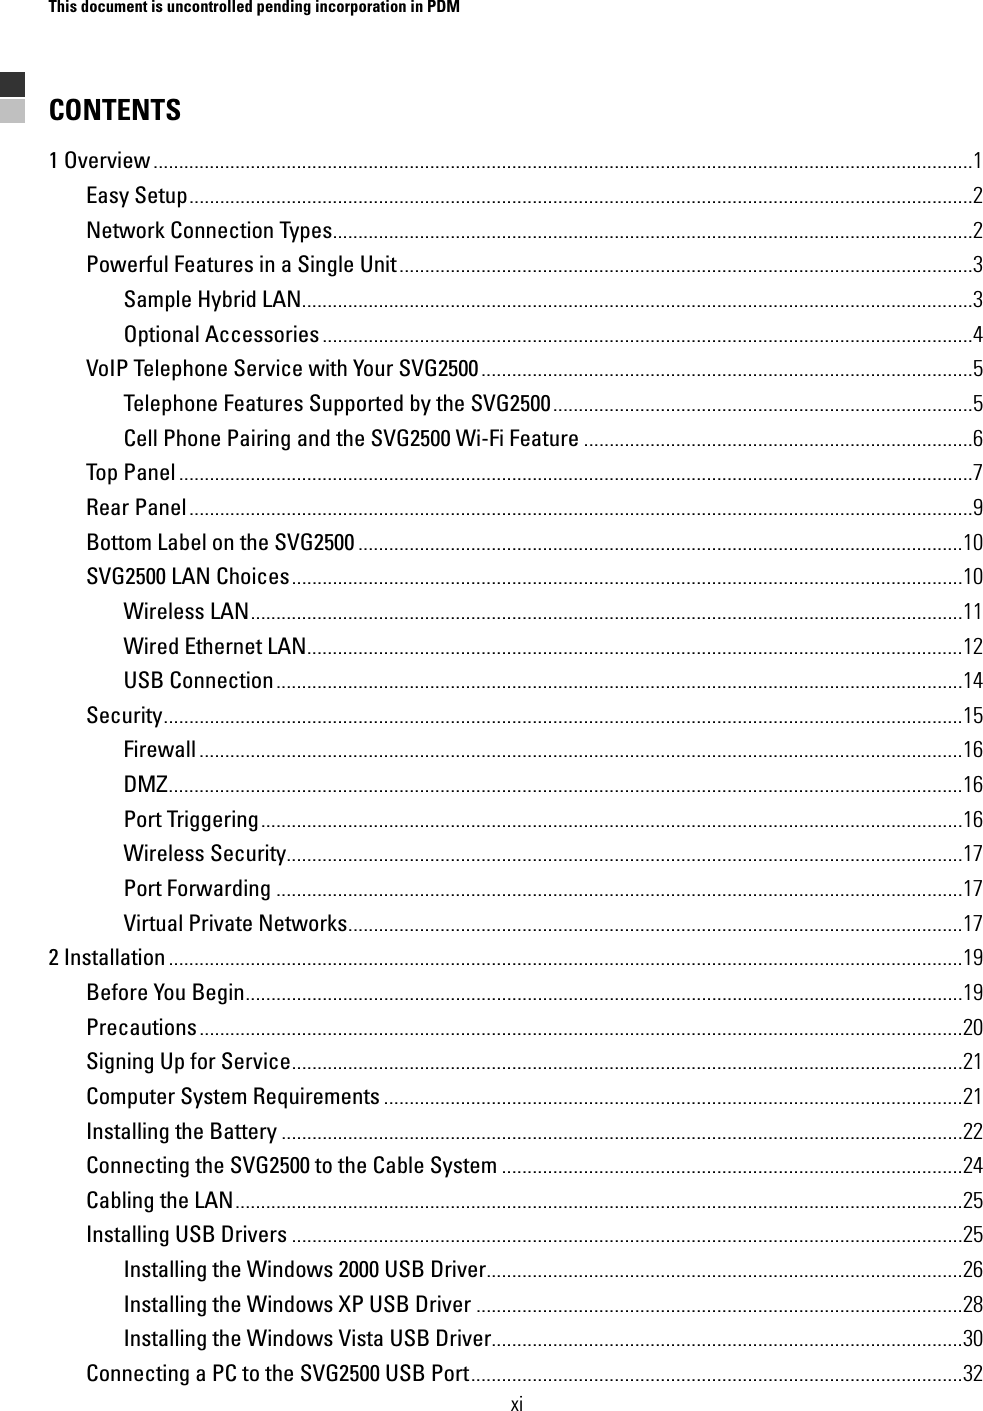 This document is uncontrolled pending incorporation in PDM  xi CONTENTS 1 Overview ................................................................................................................................................................1 Easy Setup.........................................................................................................................................................2 Network Connection Types.............................................................................................................................2 Powerful Features in a Single Unit................................................................................................................3 Sample Hybrid LAN...................................................................................................................................3 Optional Accessories...............................................................................................................................4 VoIP Telephone Service with Your SVG2500................................................................................................5 Telephone Features Supported by the SVG2500..................................................................................5 Cell Phone Pairing and the SVG2500 Wi-Fi Feature ............................................................................6 Top Panel ...........................................................................................................................................................7 Rear Panel.........................................................................................................................................................9 Bottom Label on the SVG2500 ......................................................................................................................10 SVG2500 LAN Choices...................................................................................................................................10 Wireless LAN...........................................................................................................................................11 Wired Ethernet LAN................................................................................................................................12 USB Connection......................................................................................................................................14 Security............................................................................................................................................................15 Firewall .....................................................................................................................................................16 DMZ...........................................................................................................................................................16 Port Triggering.........................................................................................................................................16 Wireless Security....................................................................................................................................17 Port Forwarding ......................................................................................................................................17 Virtual Private Networks........................................................................................................................17 2 Installation ...........................................................................................................................................................19 Before You Begin............................................................................................................................................19 Precautions.....................................................................................................................................................20 Signing Up for Service...................................................................................................................................21 Computer System Requirements .................................................................................................................21 Installing the Battery .....................................................................................................................................22 Connecting the SVG2500 to the Cable System ..........................................................................................24 Cabling the LAN..............................................................................................................................................25 Installing USB Drivers ...................................................................................................................................25 Installing the Windows 2000 USB Driver.............................................................................................26 Installing the Windows XP USB Driver ...............................................................................................28 Installing the Windows Vista USB Driver............................................................................................30 Connecting a PC to the SVG2500 USB Port................................................................................................32 